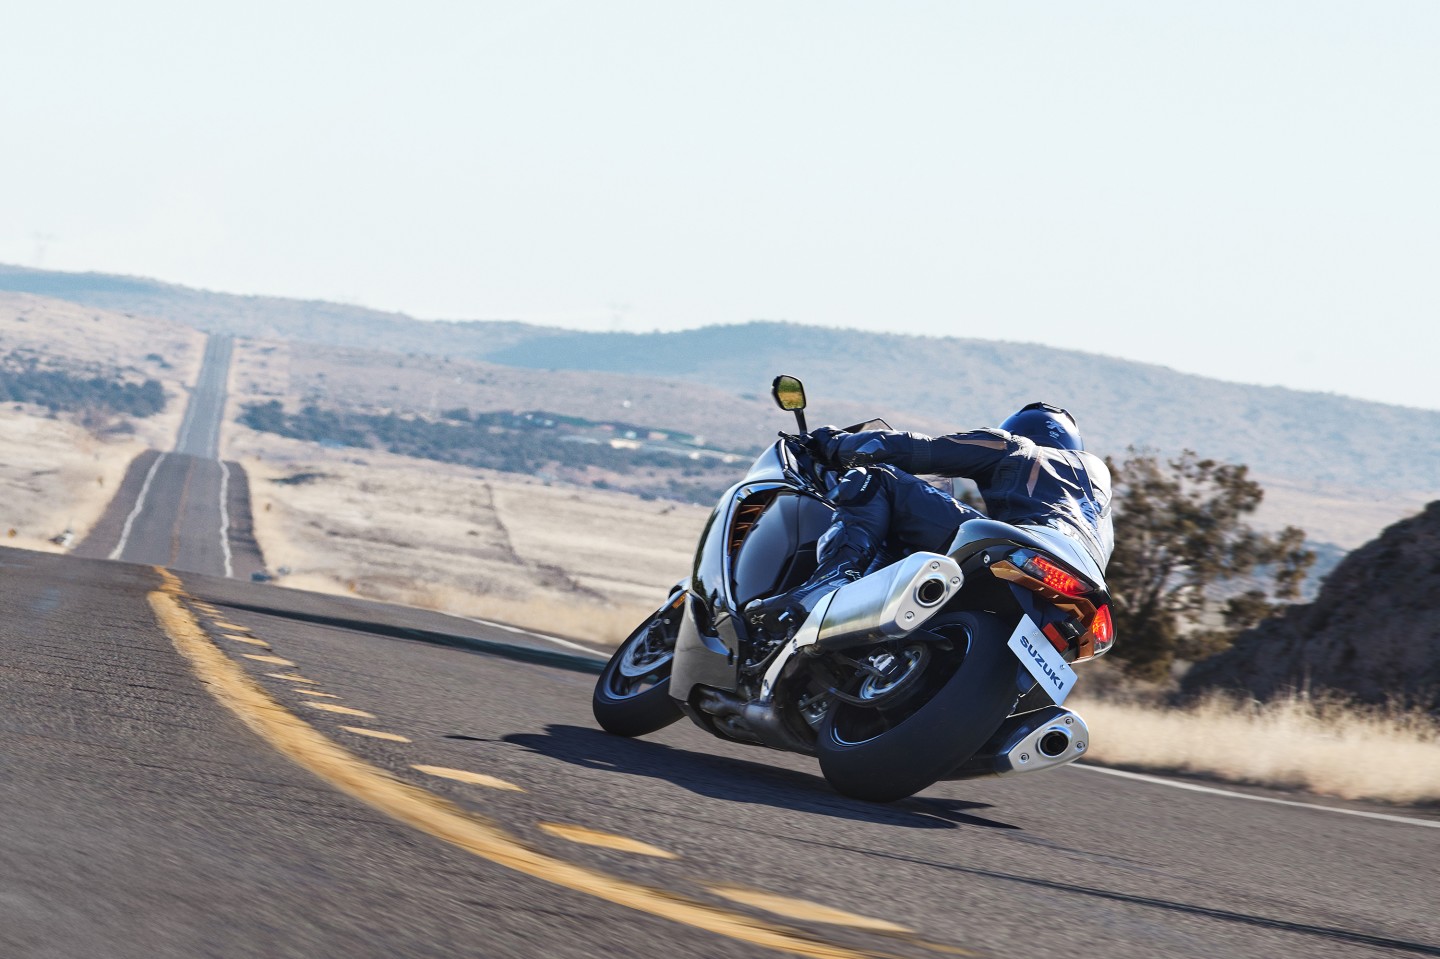 The tapered triangle section shape of the exhausts offers extra lean angle – and there's few bikes you'd want to be on more when the road opens out like this